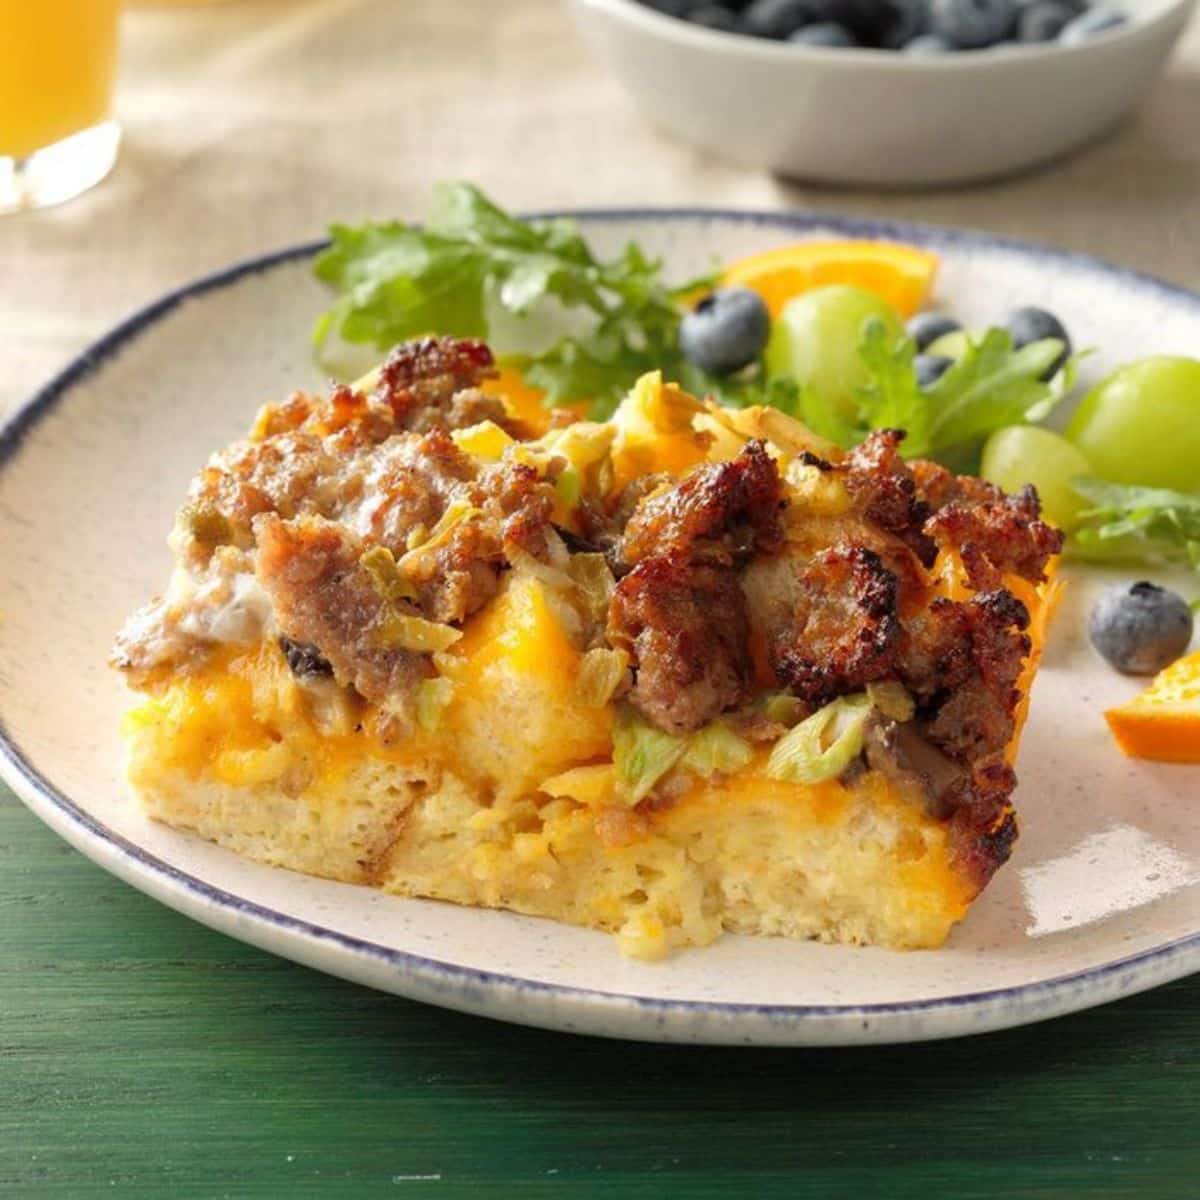 A piece of green chile brunch bake on a plate.